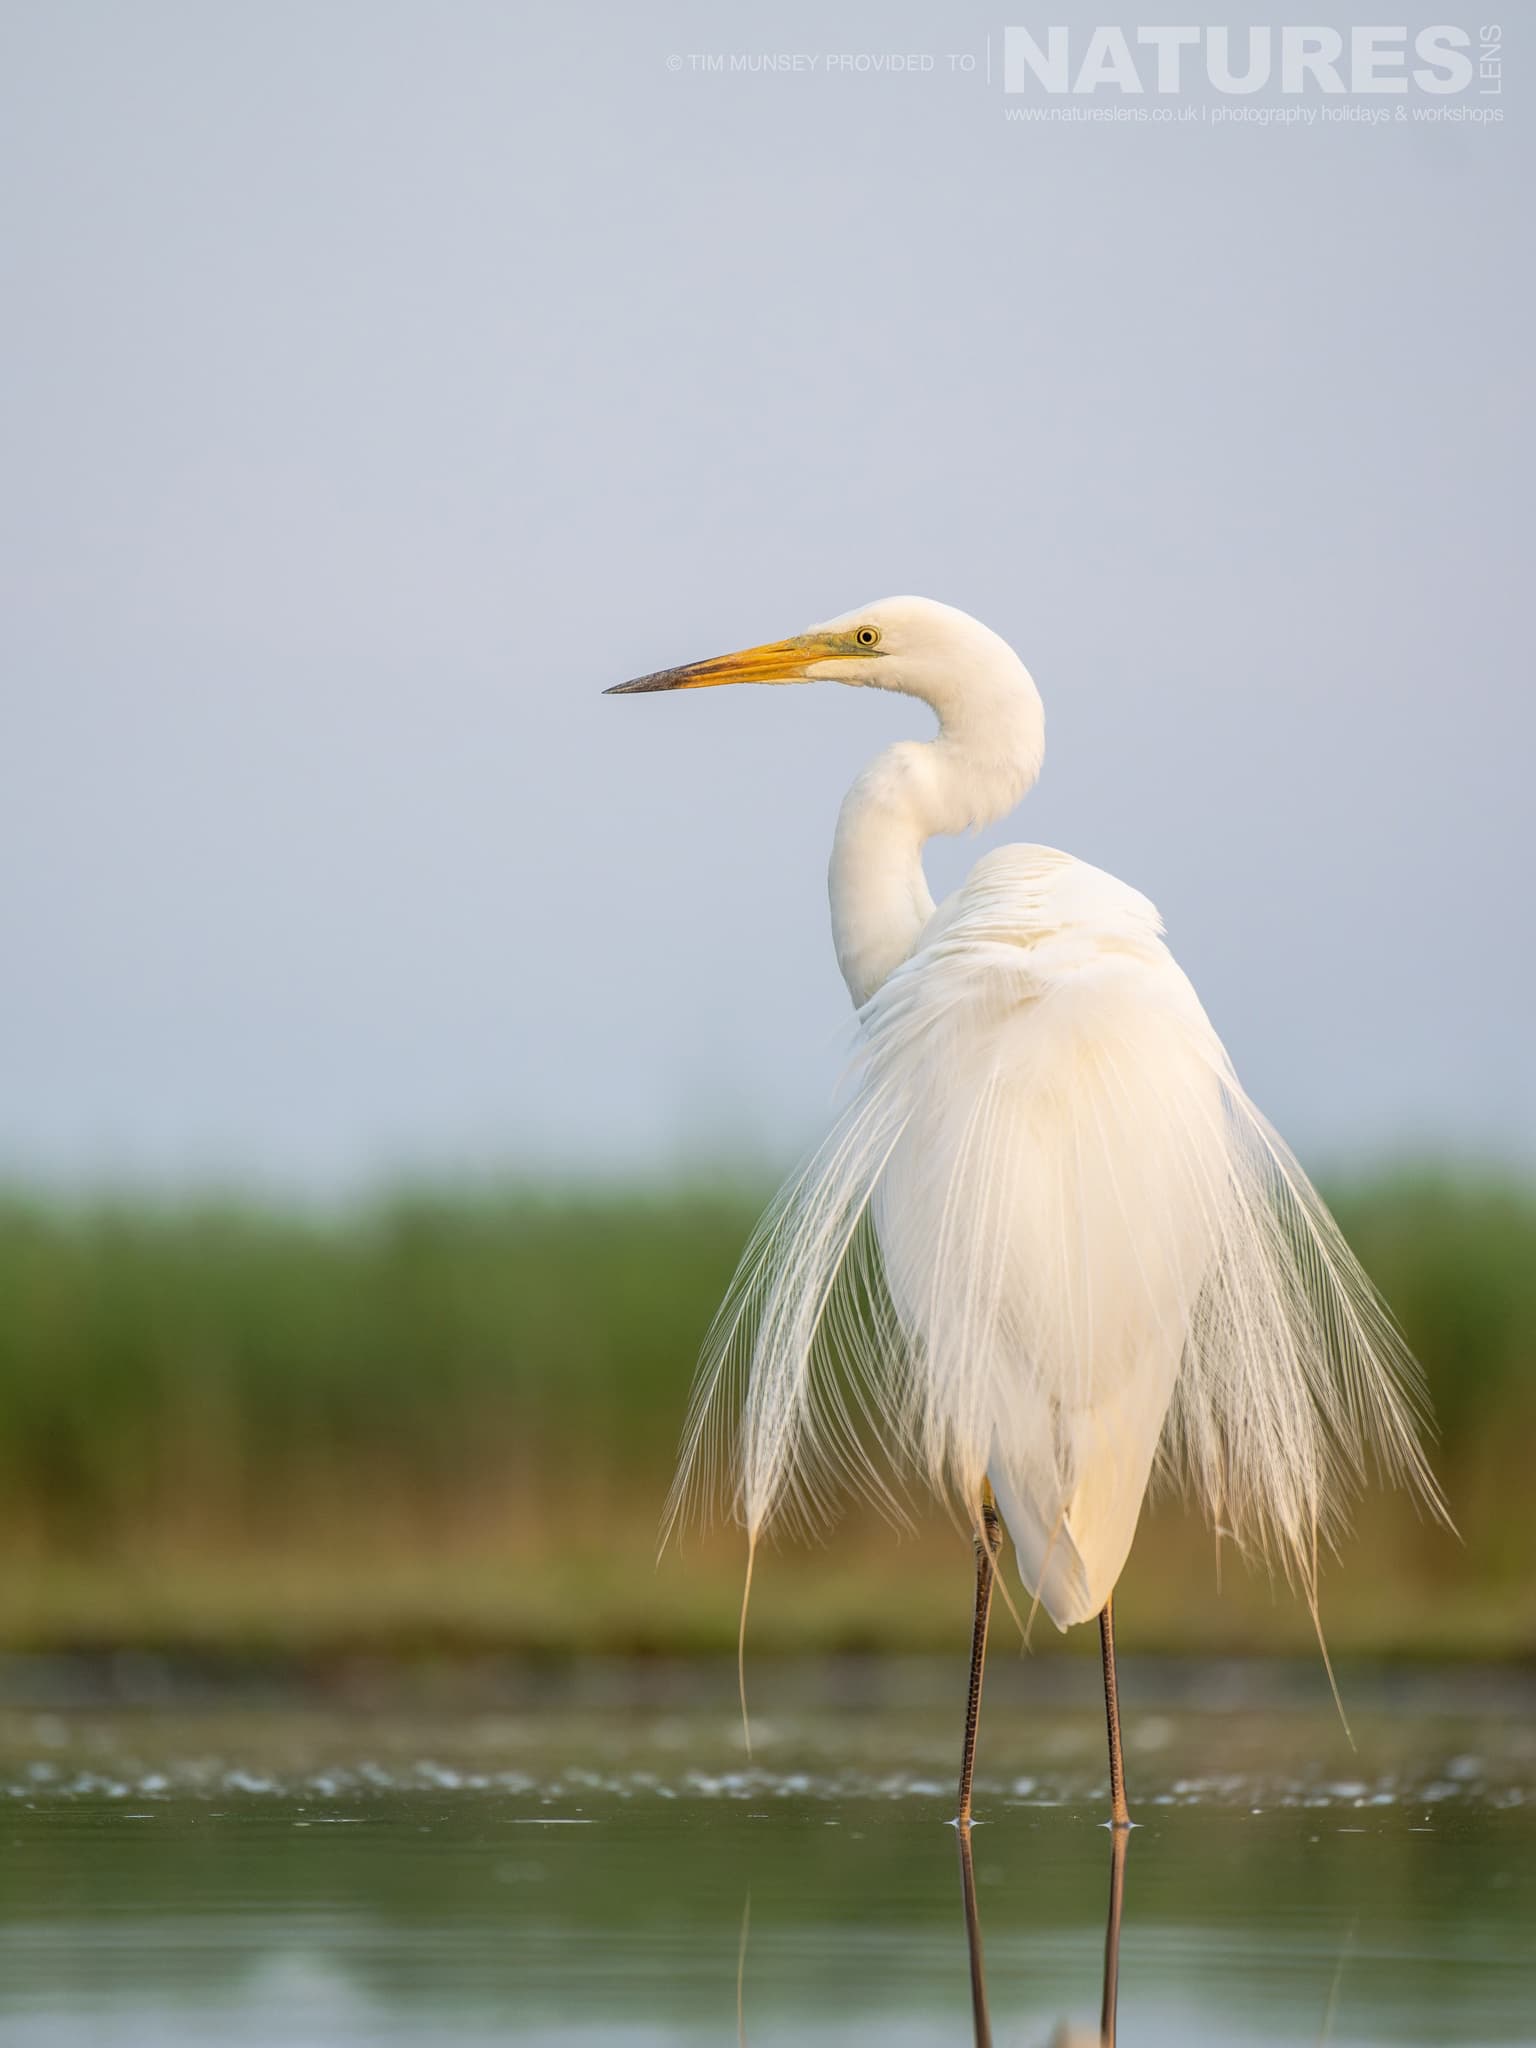 An Egret standing alert at one of the ponds - photographed at Bence Máté's hides in Hungary during a NaturesLens wildlife photography holiday